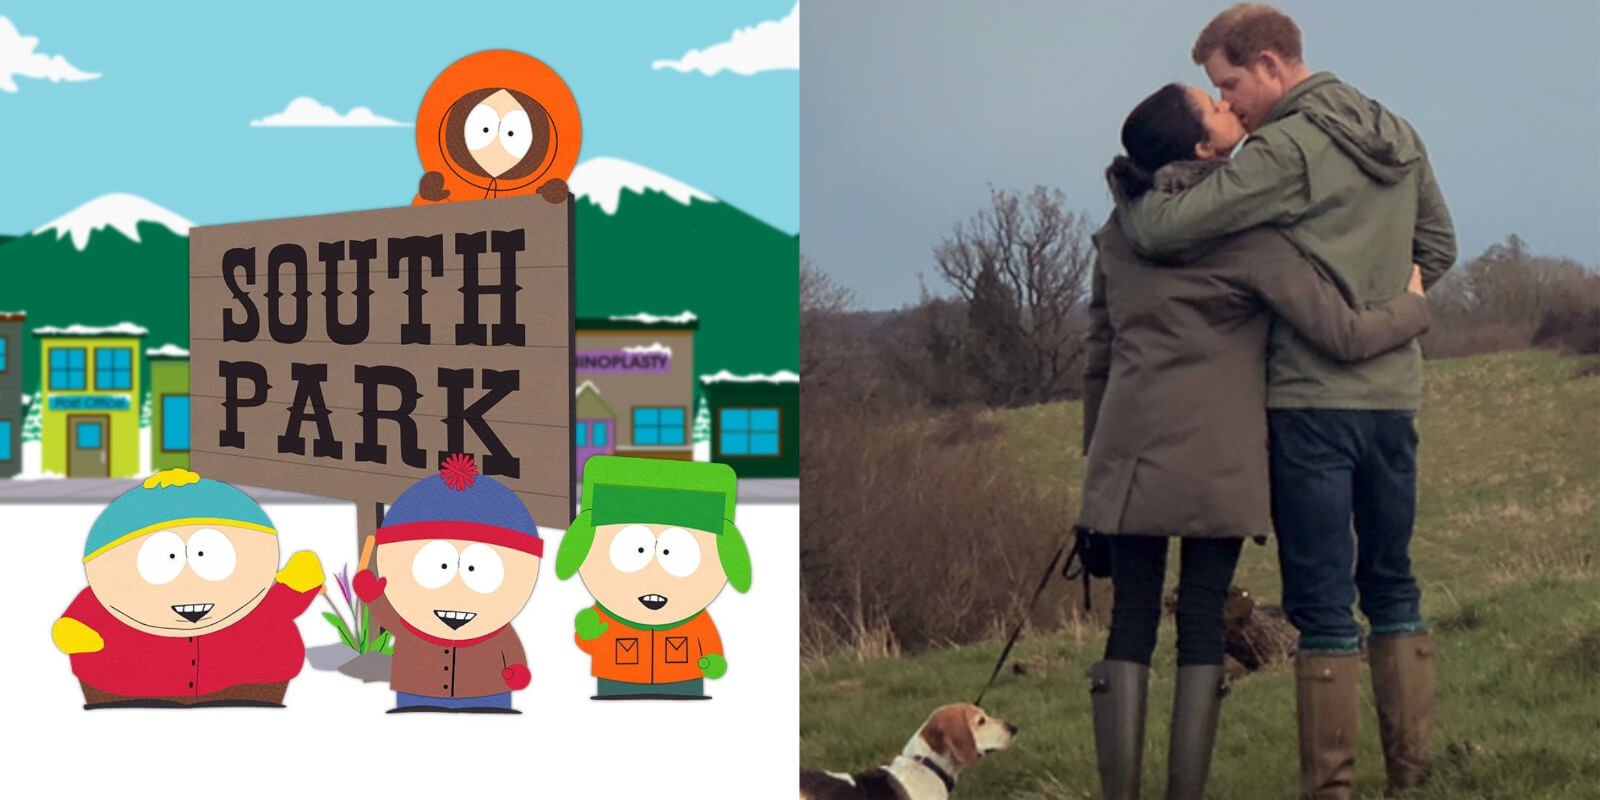 Attention Seeking Royals Ruffled by Brutal South Park Parody - The Maine  Wire